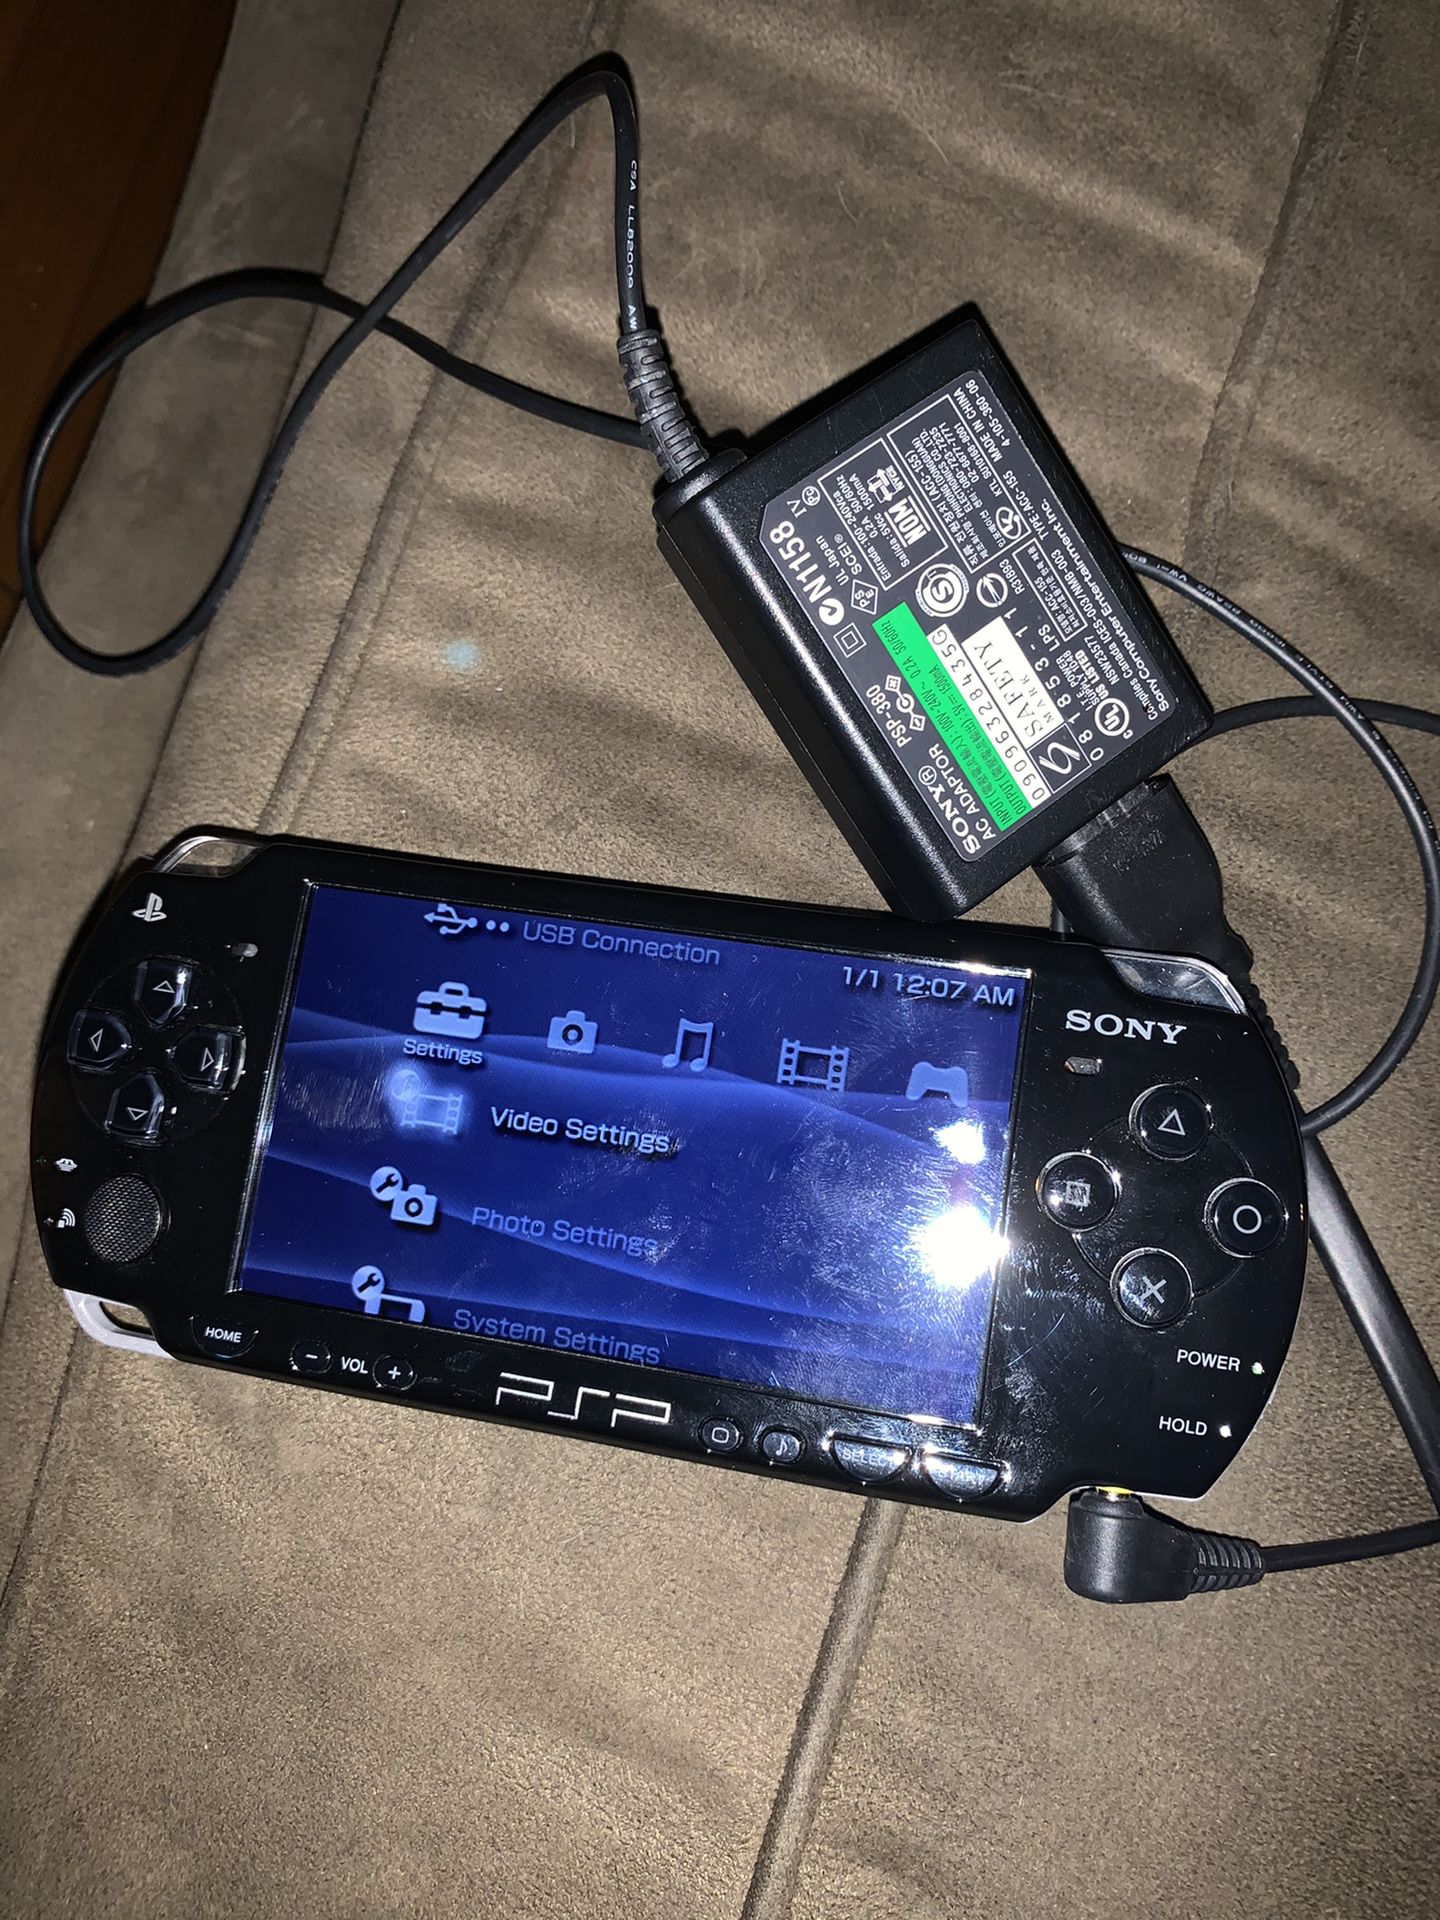 PlayStation Portable PSP Slim 2001 Needs Battery includes Memory Stick Duo card